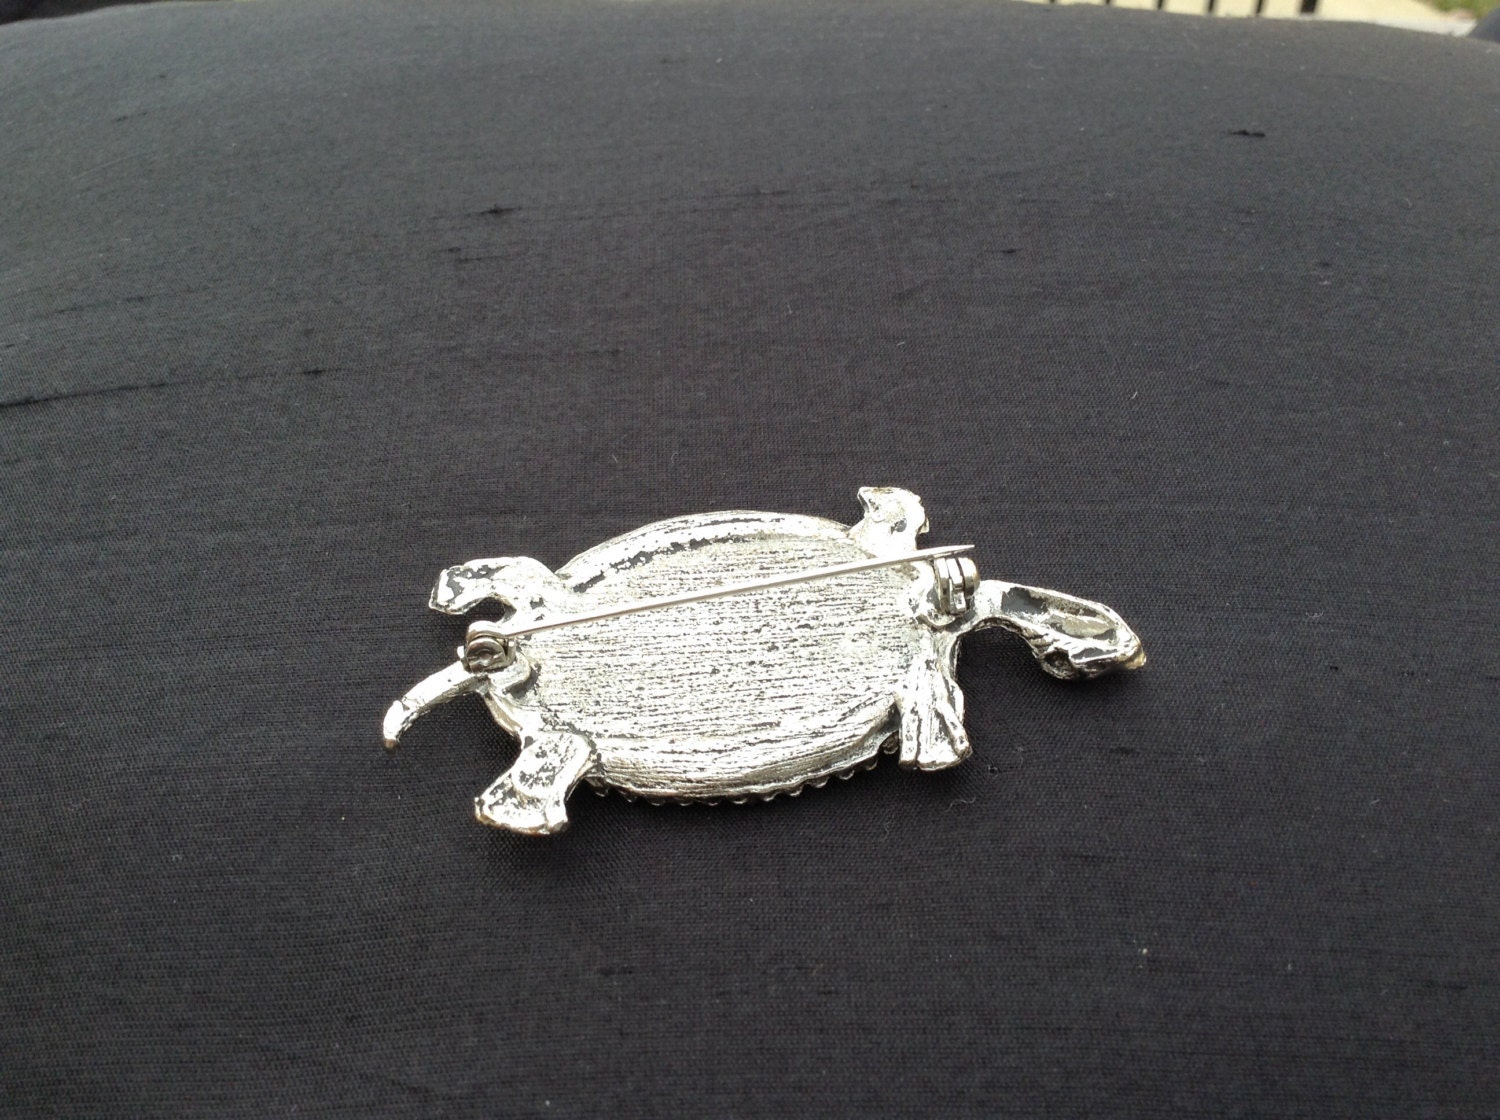 On Sale 20% Off Vintage Turtle Brooch Pin with Lavender and